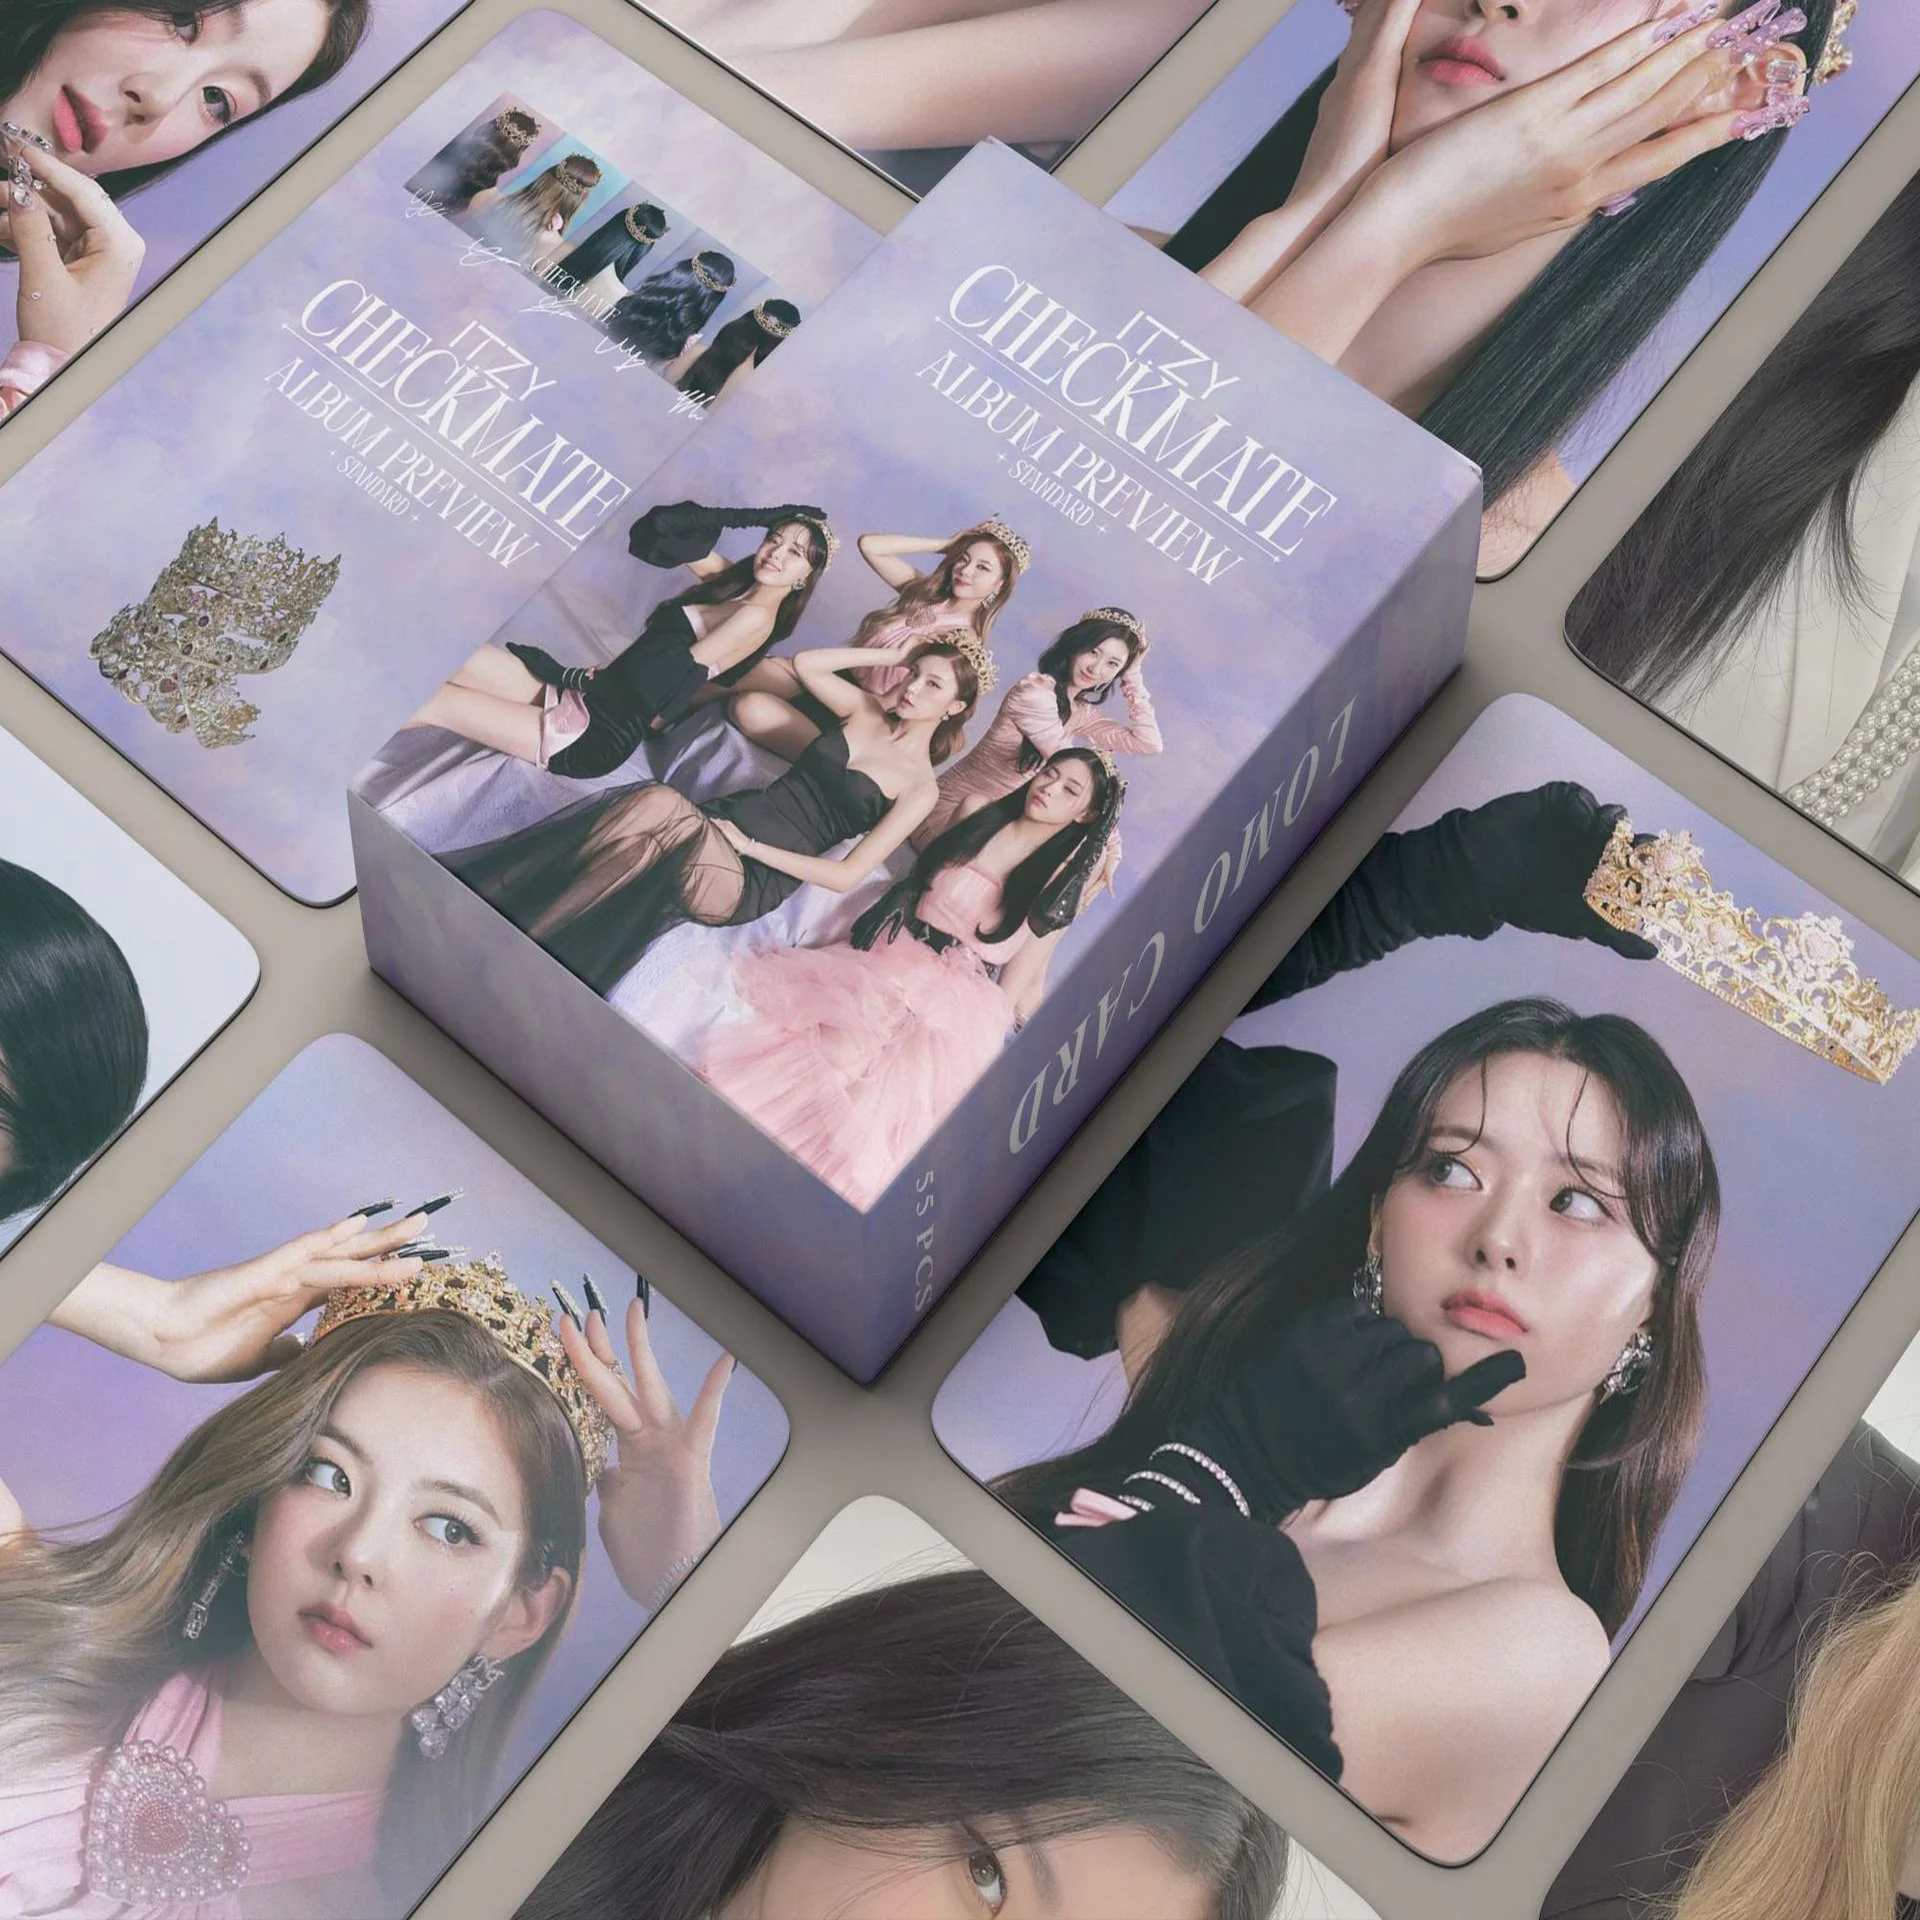 55pcs/set Kpop ITZY CHECKMATE BEST FRIENDS FOREVER Lomo Cards Greeting Season Photo album Cards Photocard Postcard Fashion 54pcs set kpop itzy lomo cards best friends forever 2022 greeting season photo album cards photocard postcard pictures fans gift